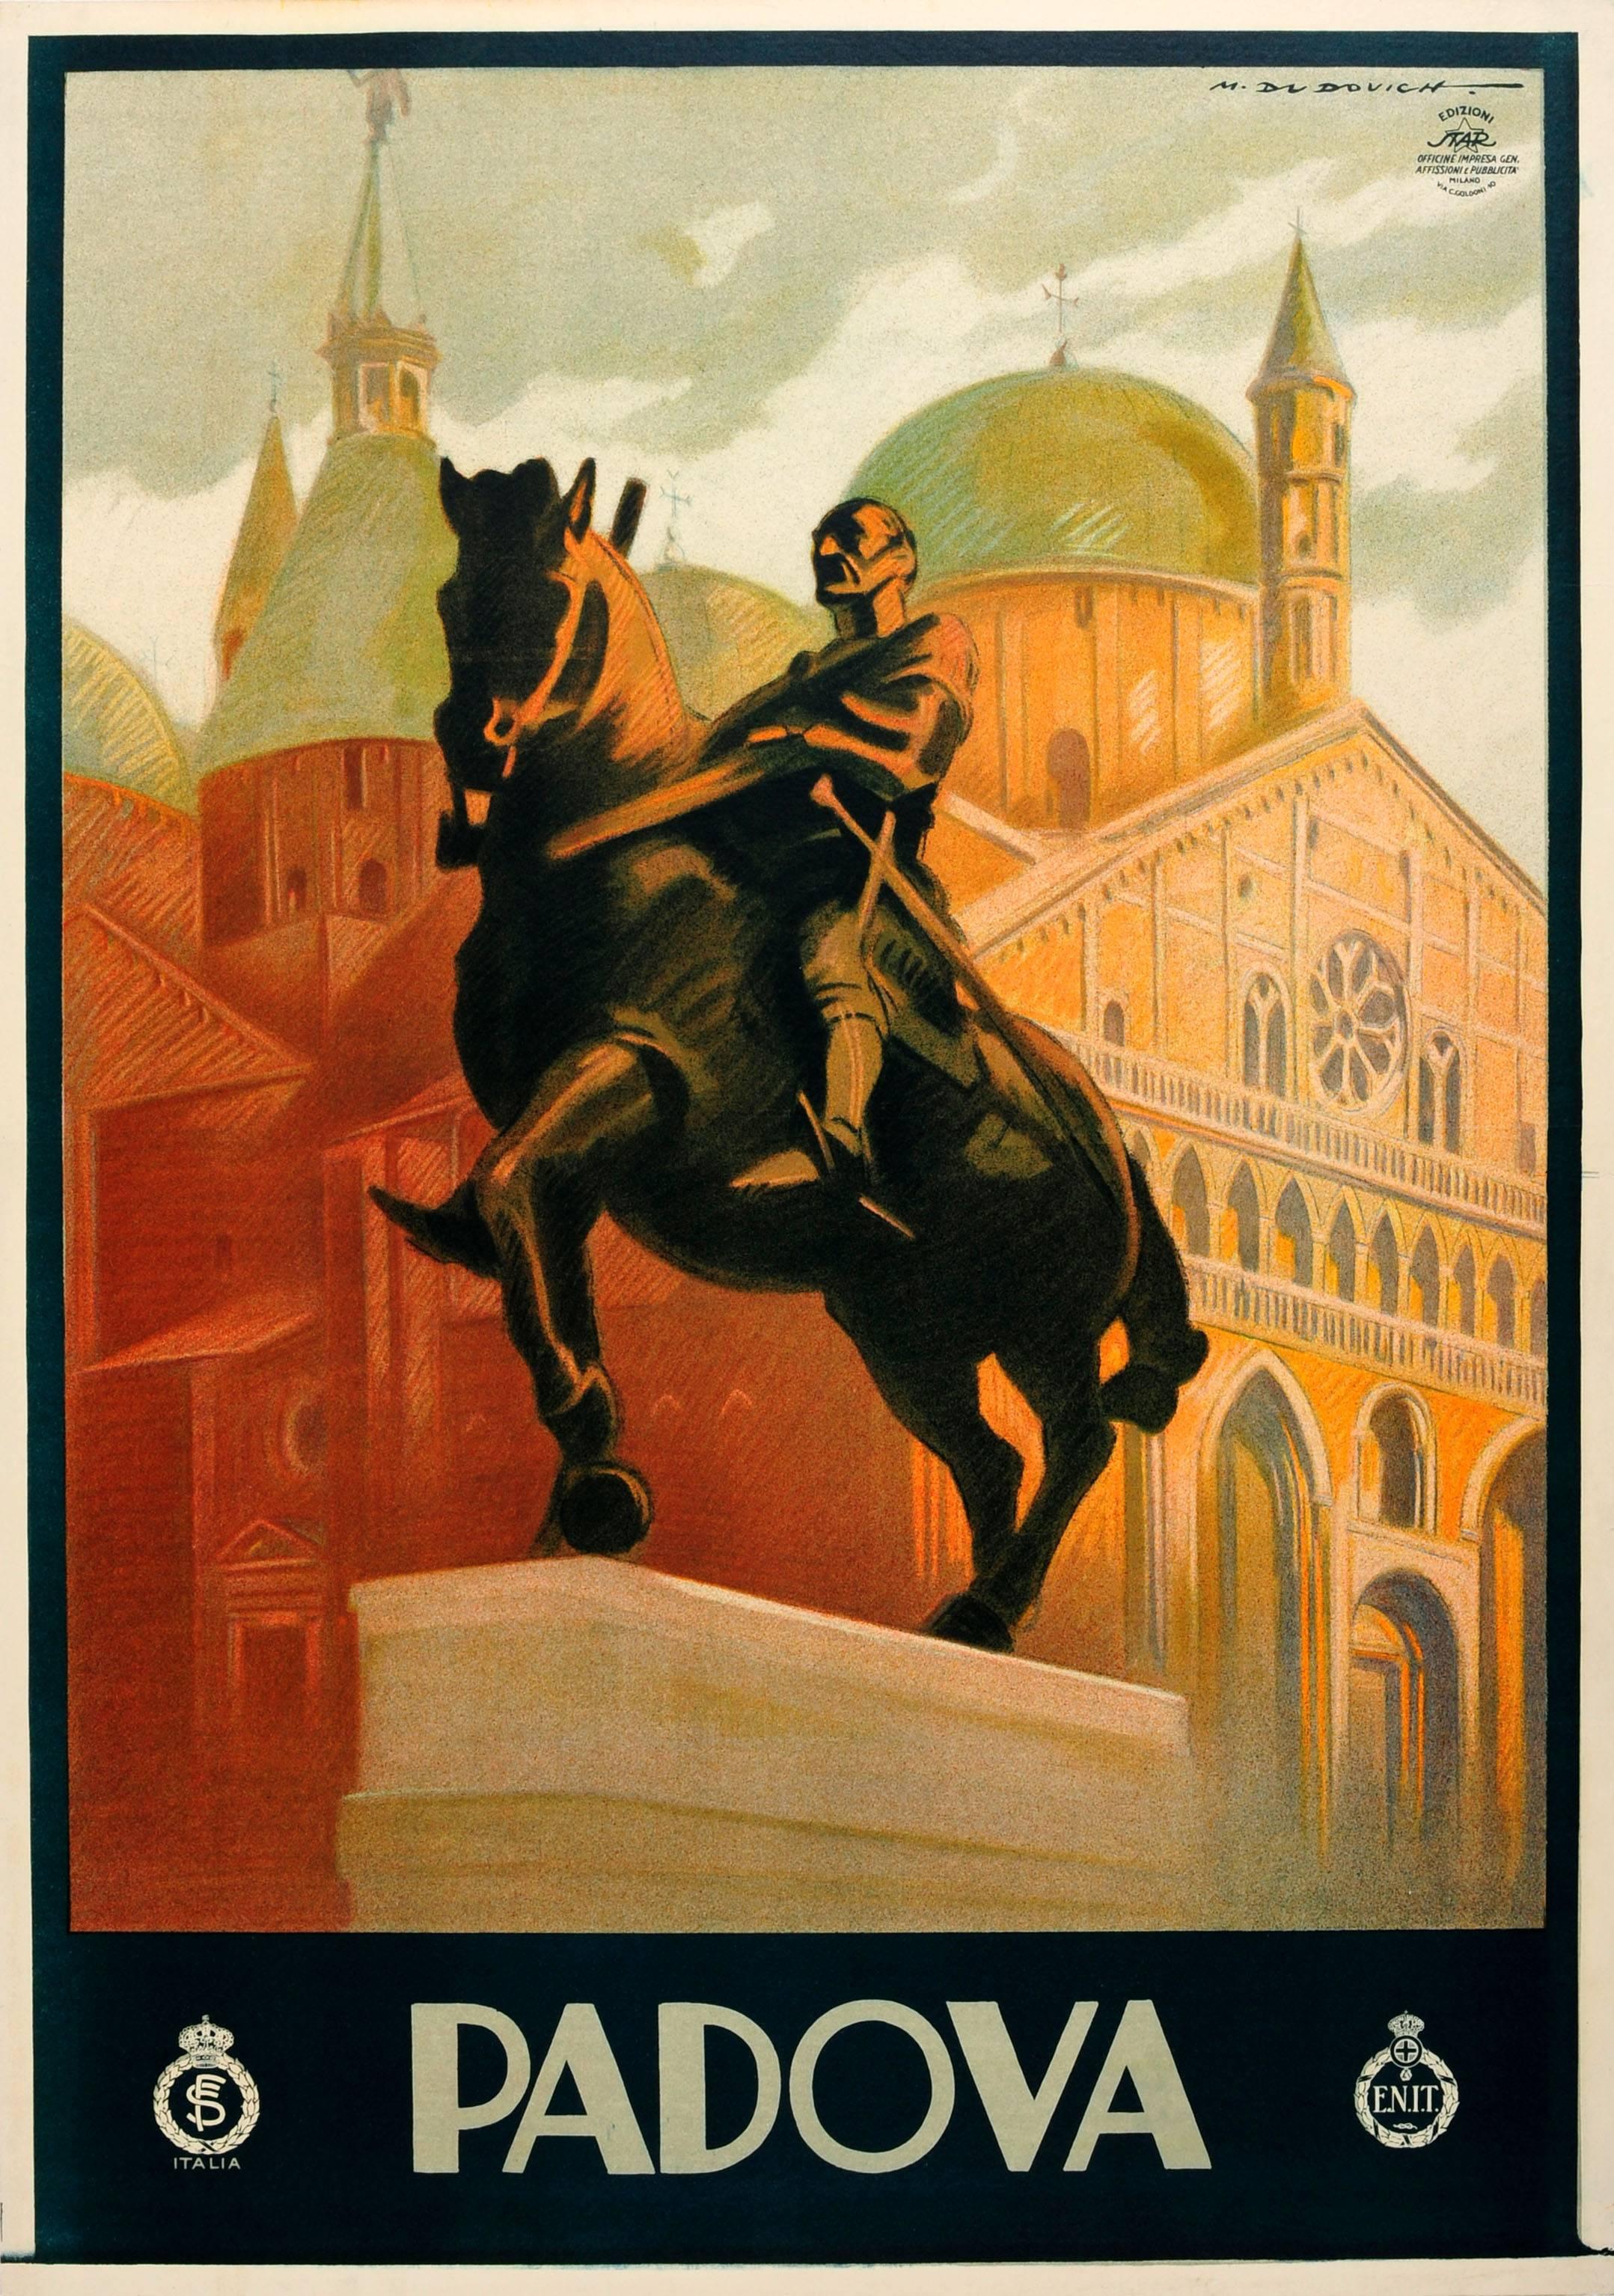 Marcello Dudovich Print - Original Vintage ENIT Travel Advertising Poster By Dudovich For Padova In Italy